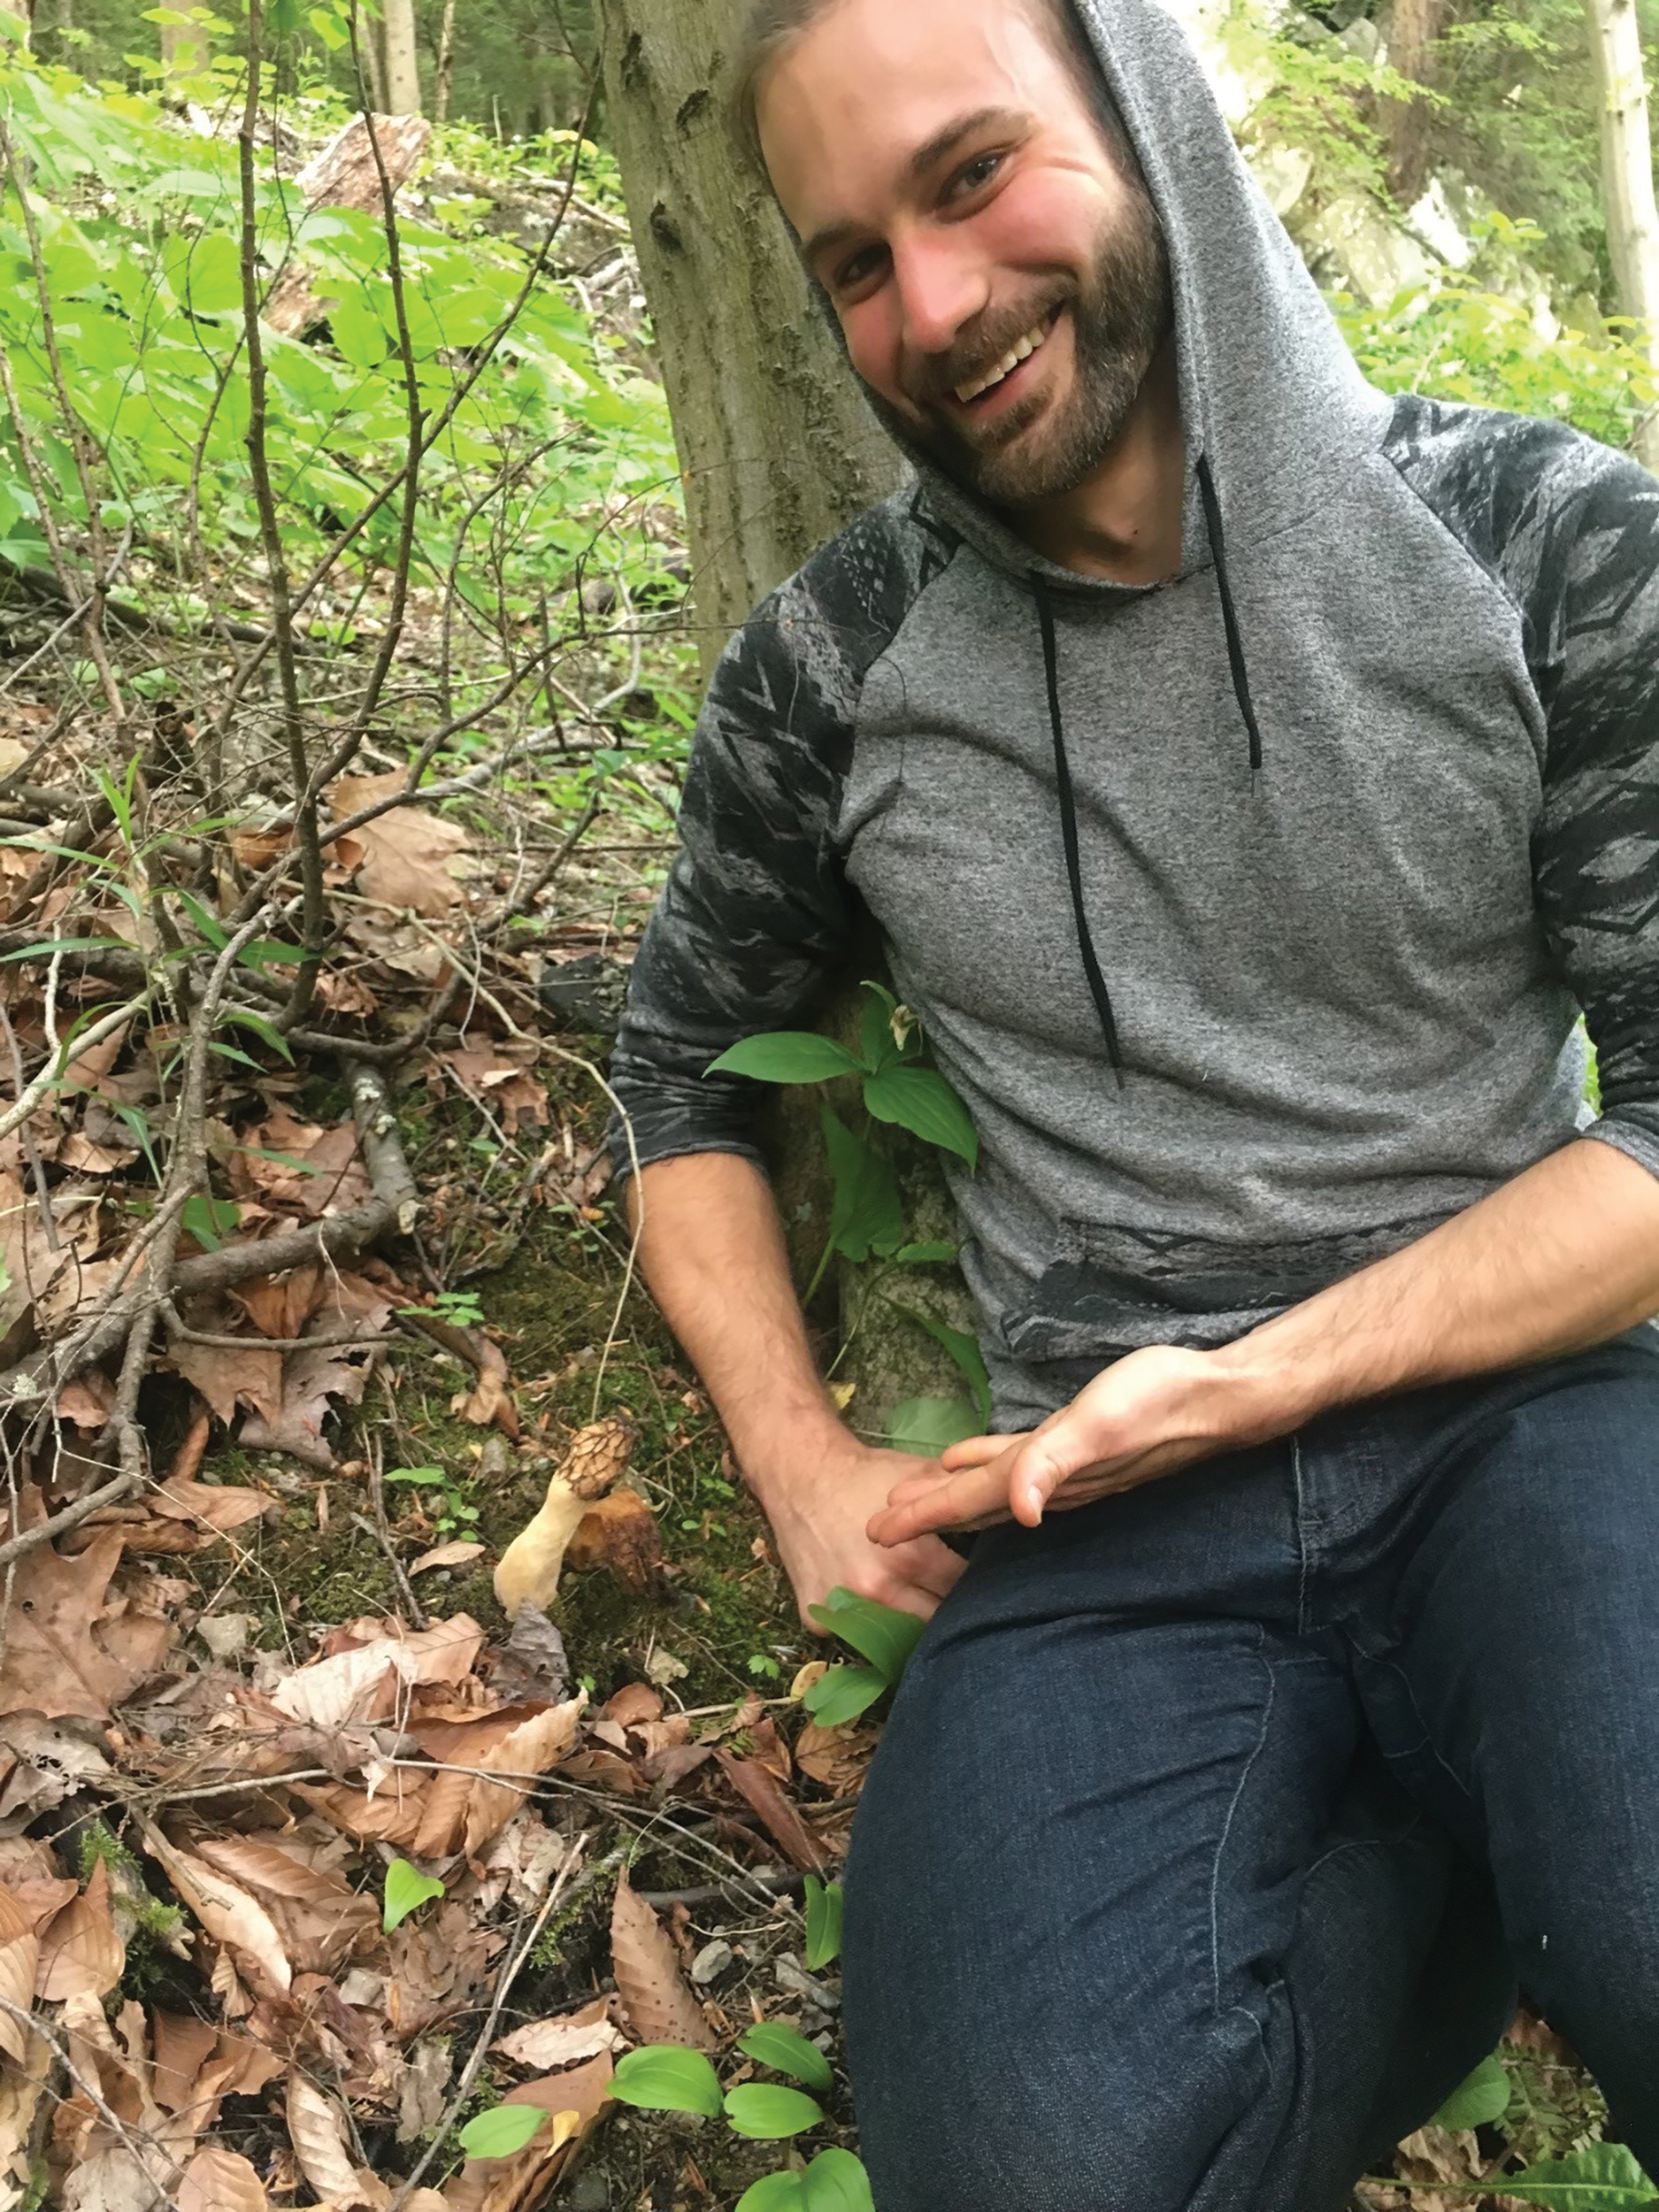 Josh Mowris of Crawford County says he has the best luck finding elusive morel mushrooms near trees